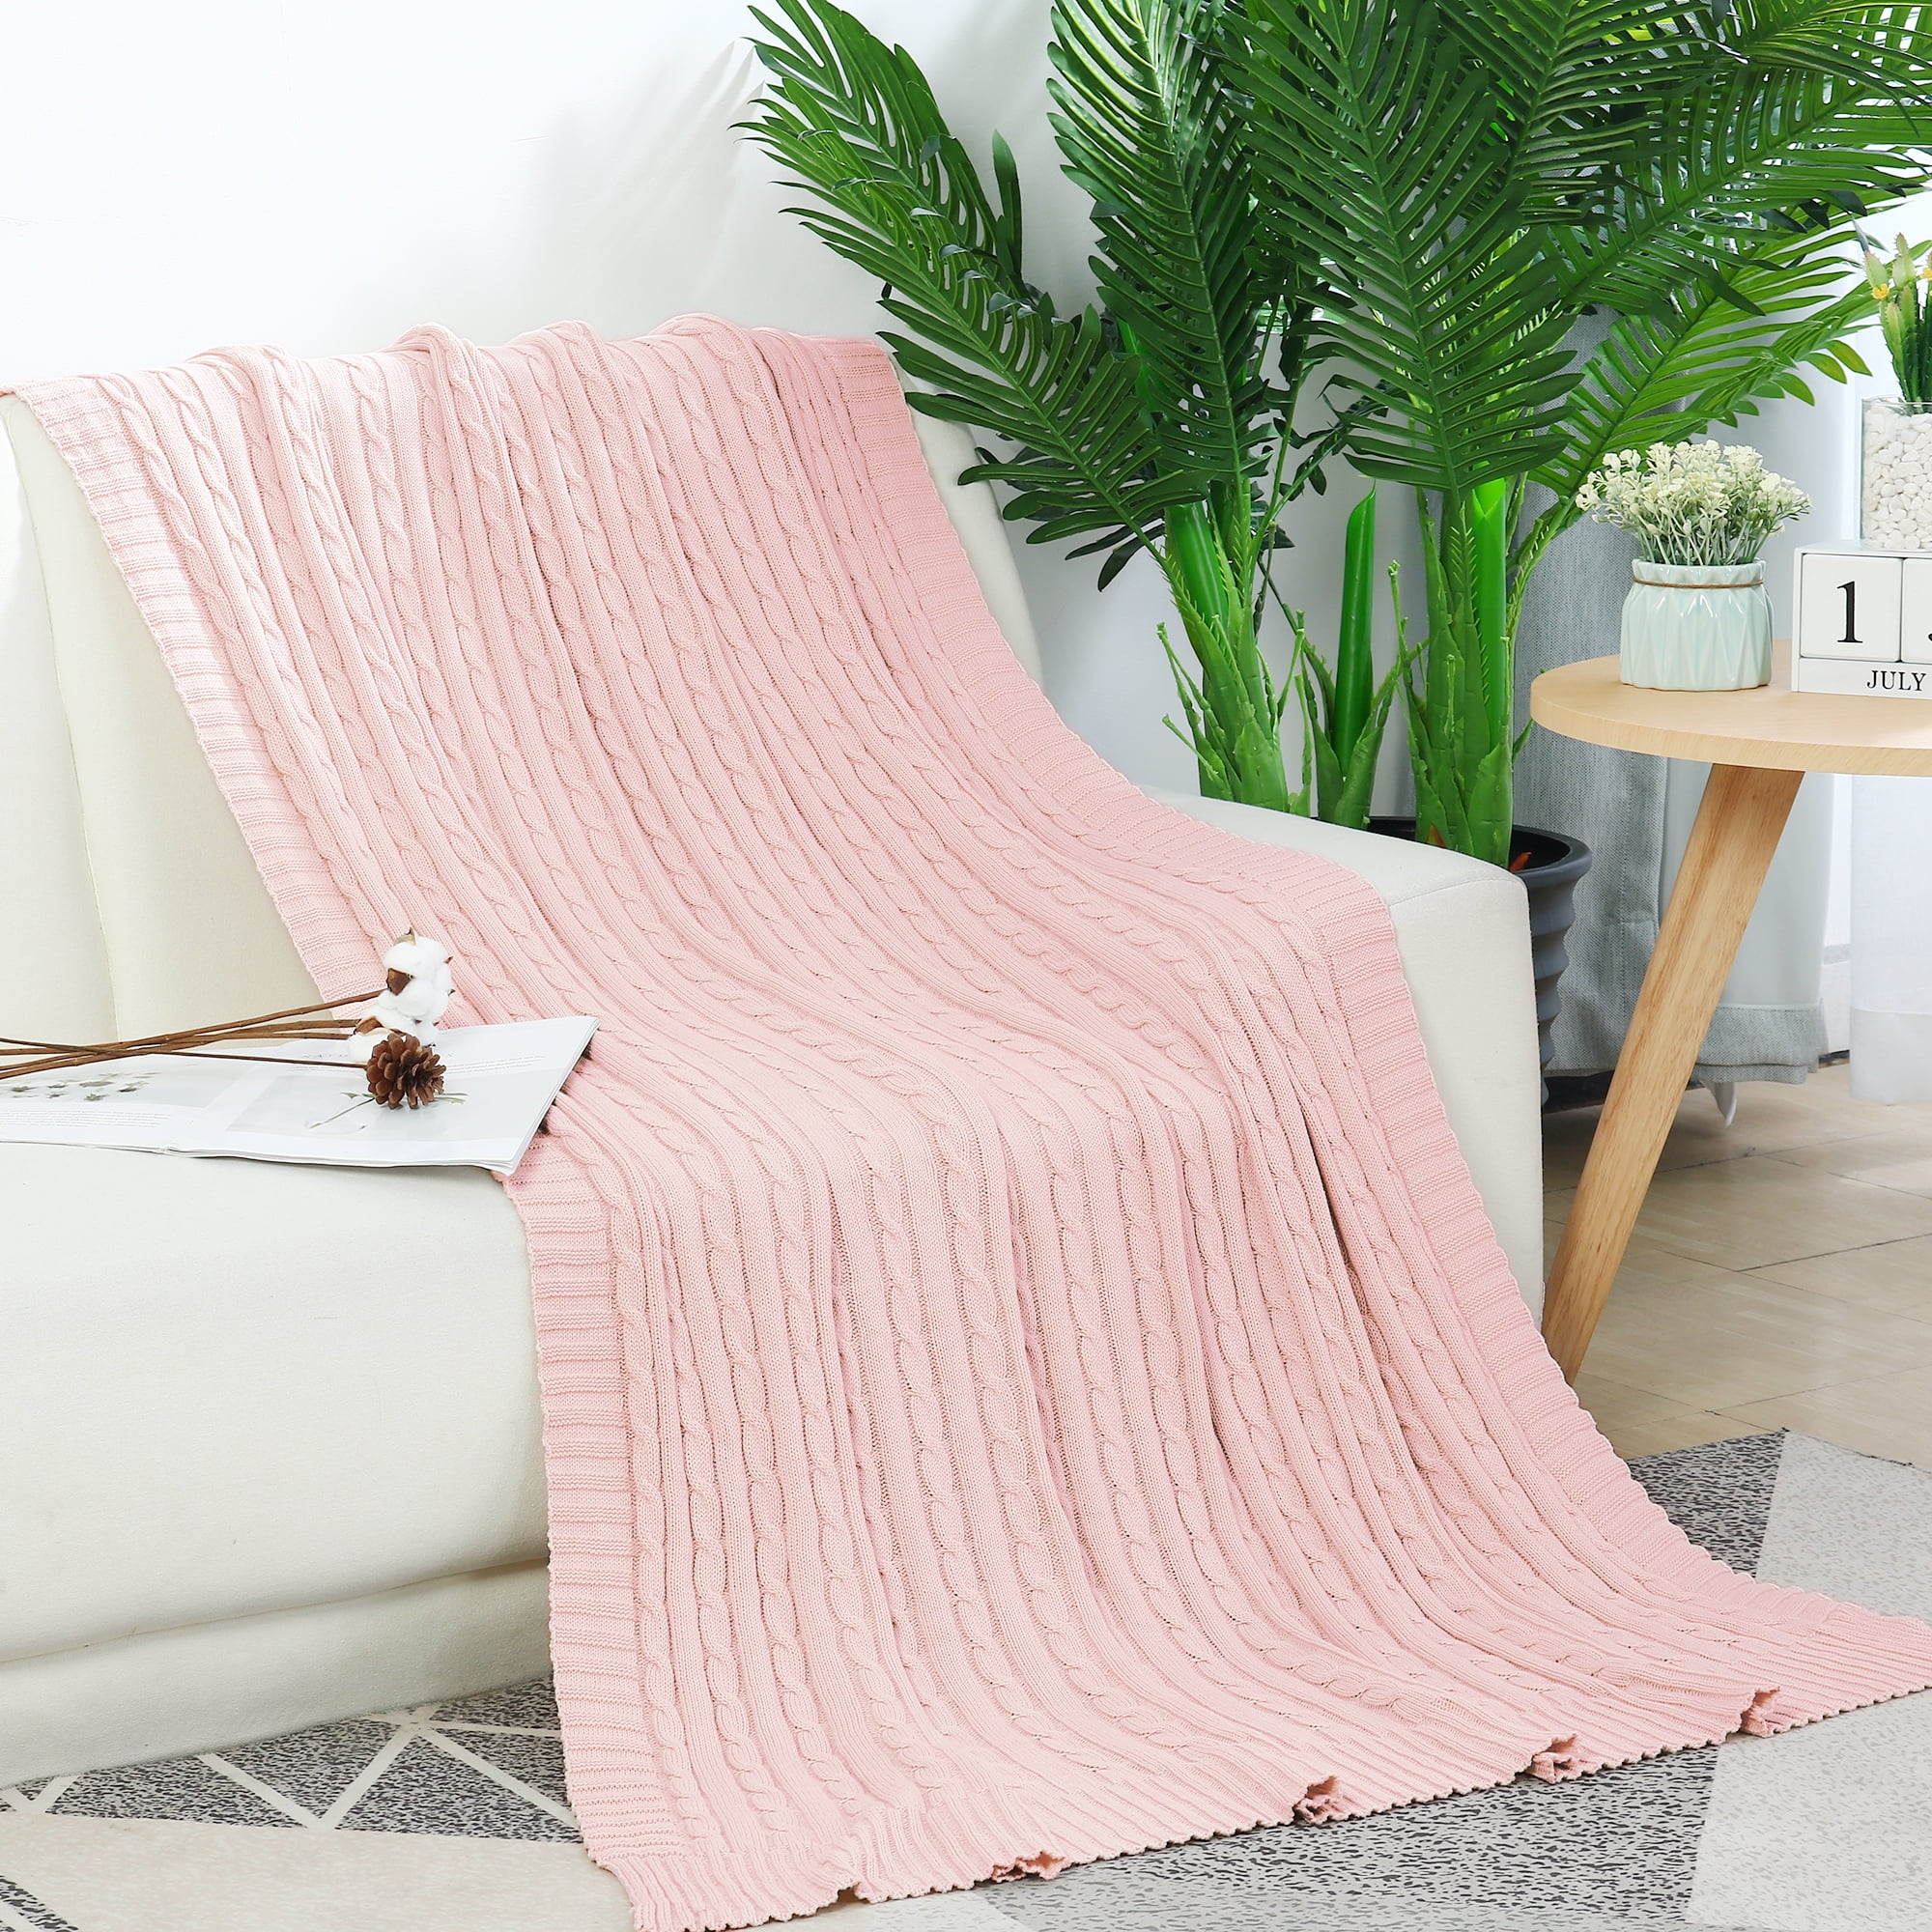 Cotton Blanket Soft Warm Cable Knit Throw Home Bedding Blanket